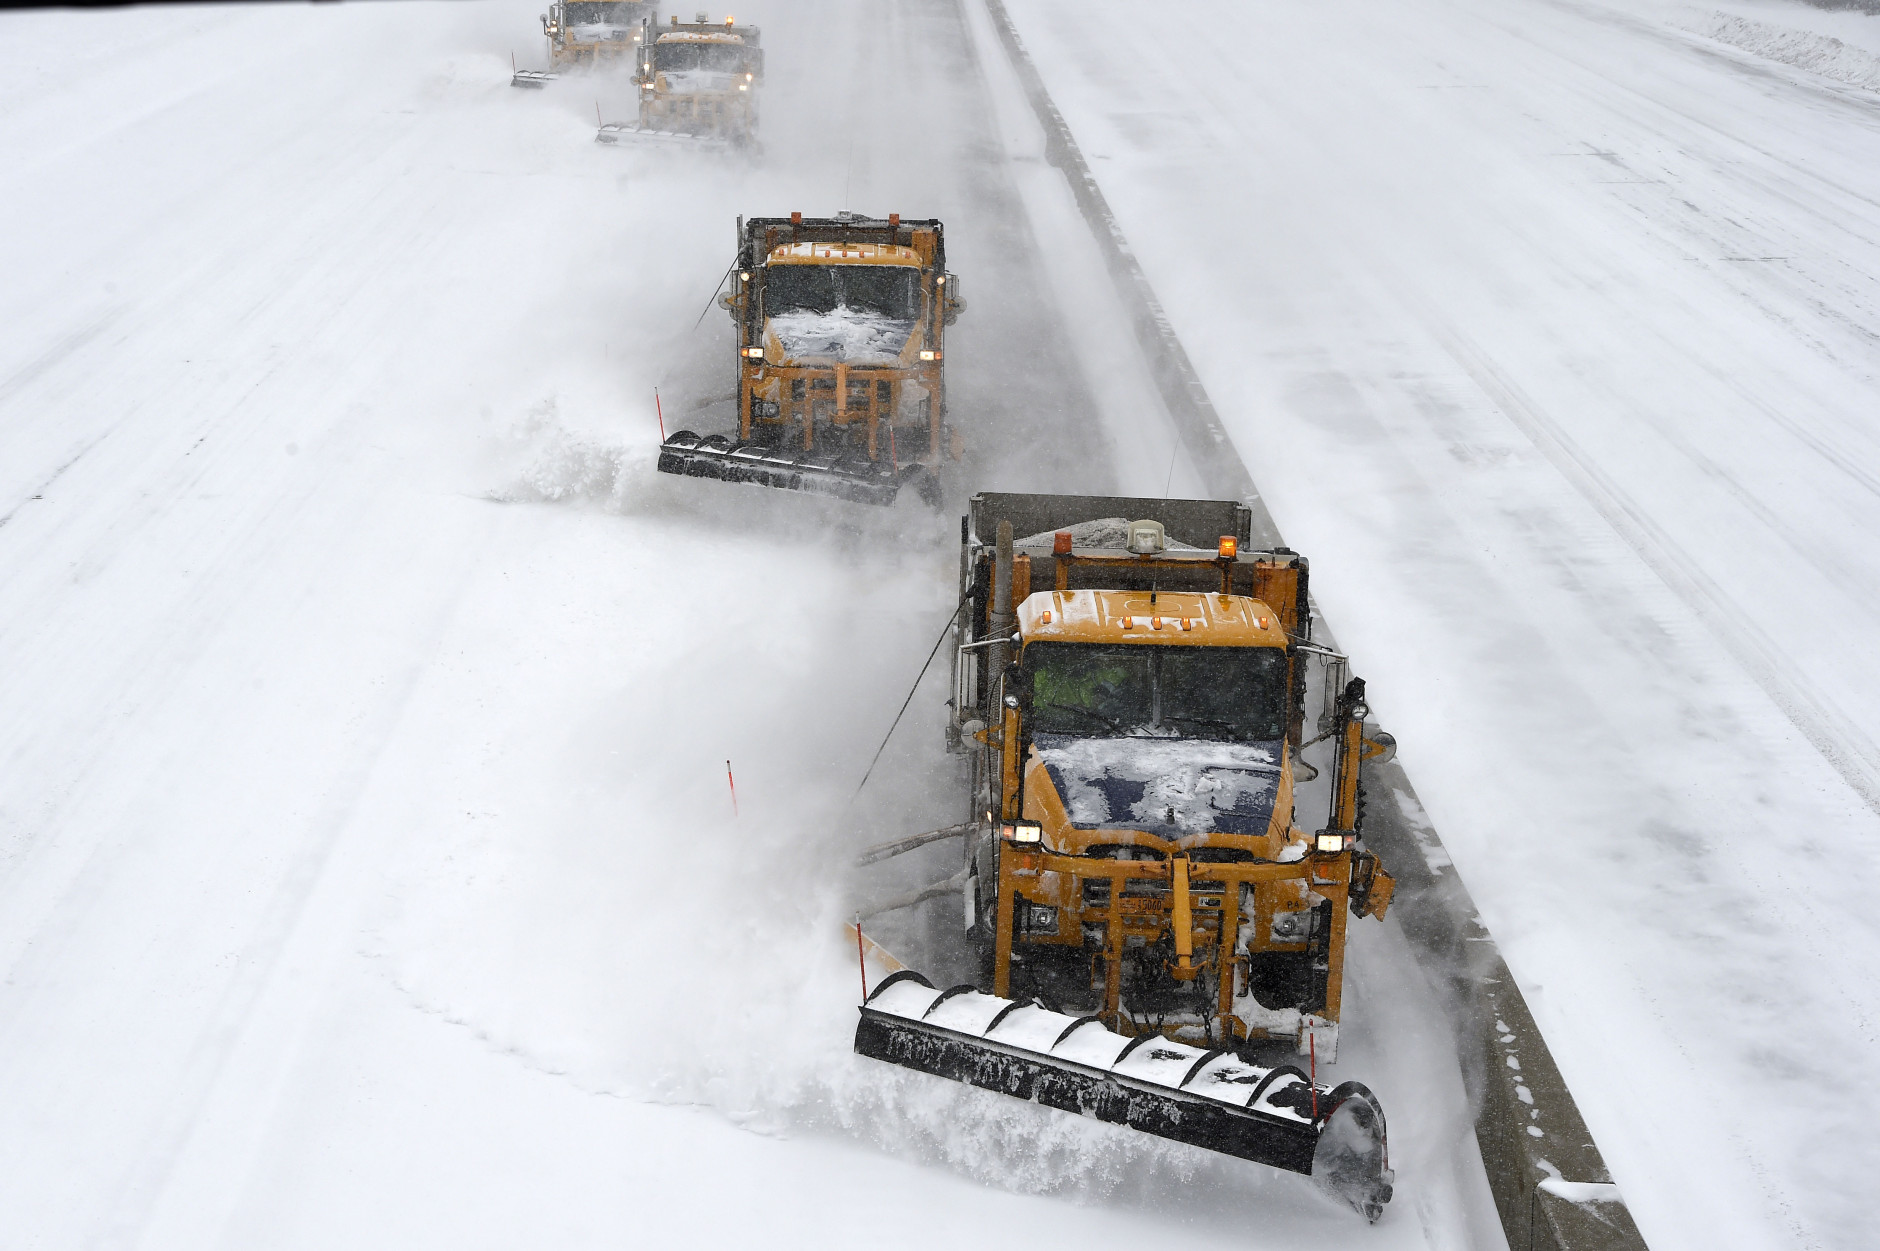 New York State Department of Transportation plows clear snow off the Long Island Expressway after it was reopened on Tuesday, Jan. 27, 2015, in Melville, N.Y. The Expressway and other roads were closed after a blizzard hit the New York area overnight into this morning. (AP Photo/Kathy Kmonicek)(AP Photo/Kathy Kmonicek)